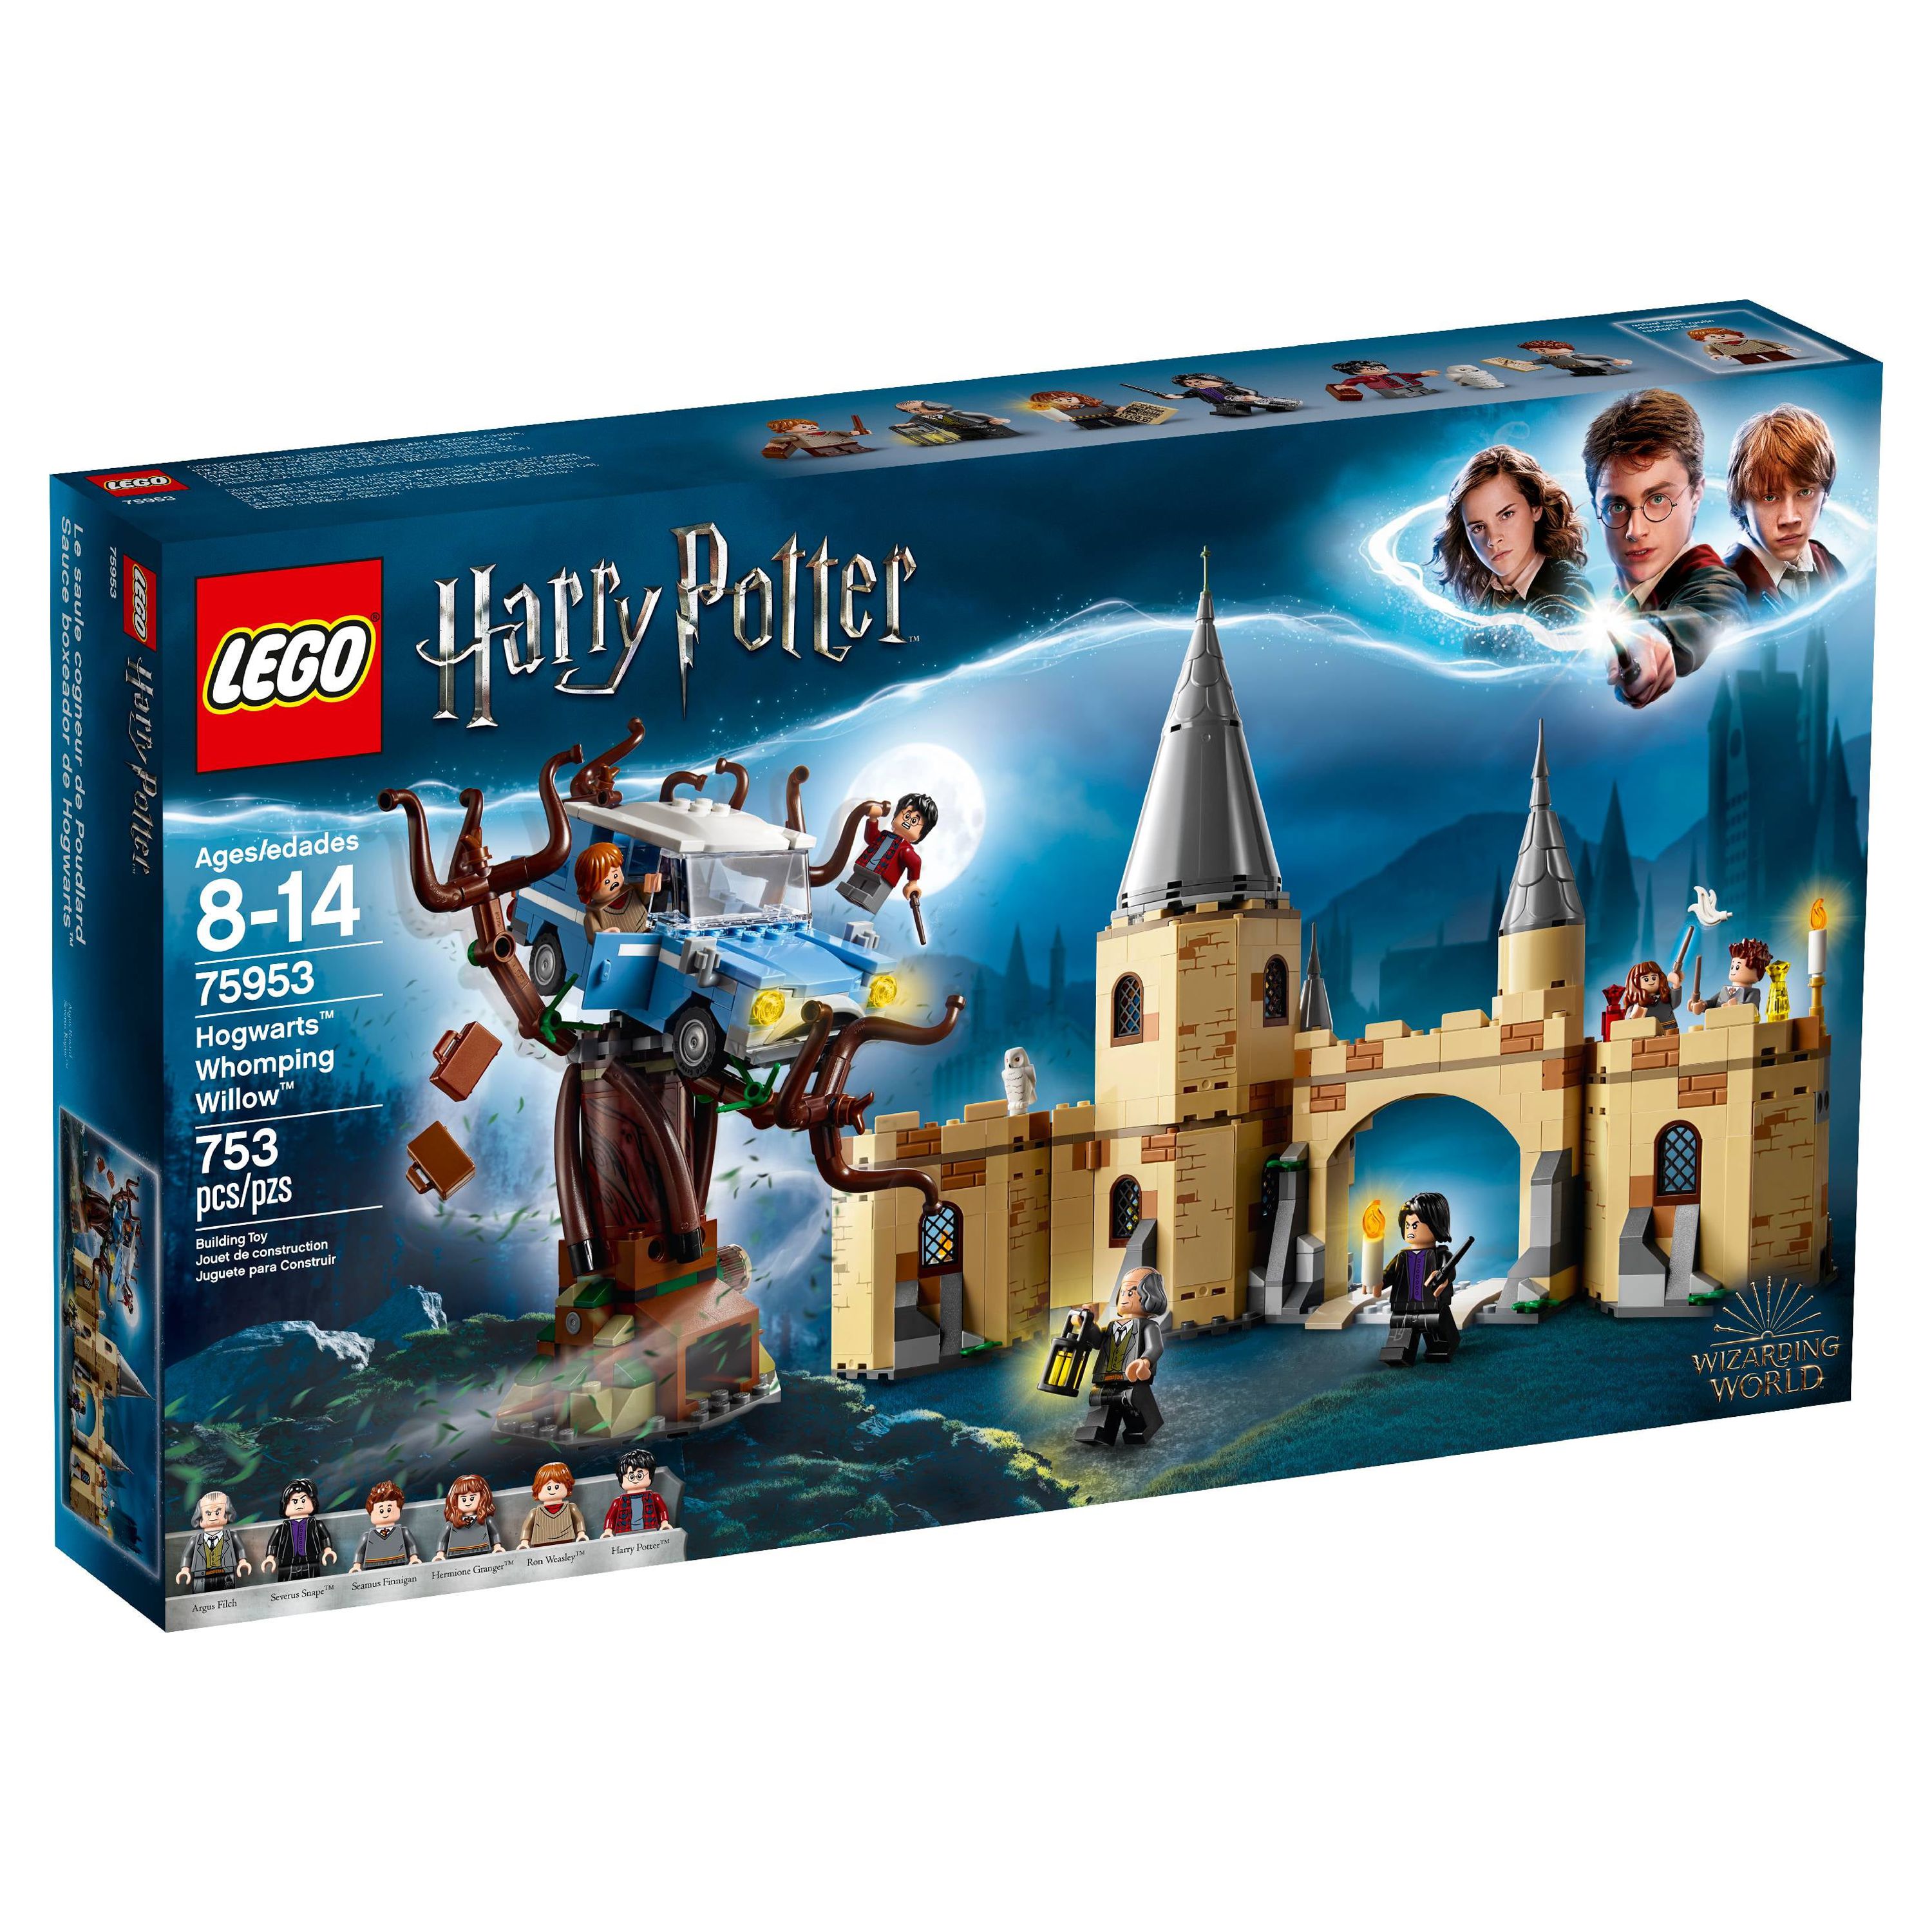 LEGO Harry Potter Hogwarts Whomping Willow 75953 (753 Pieces) - image 5 of 8